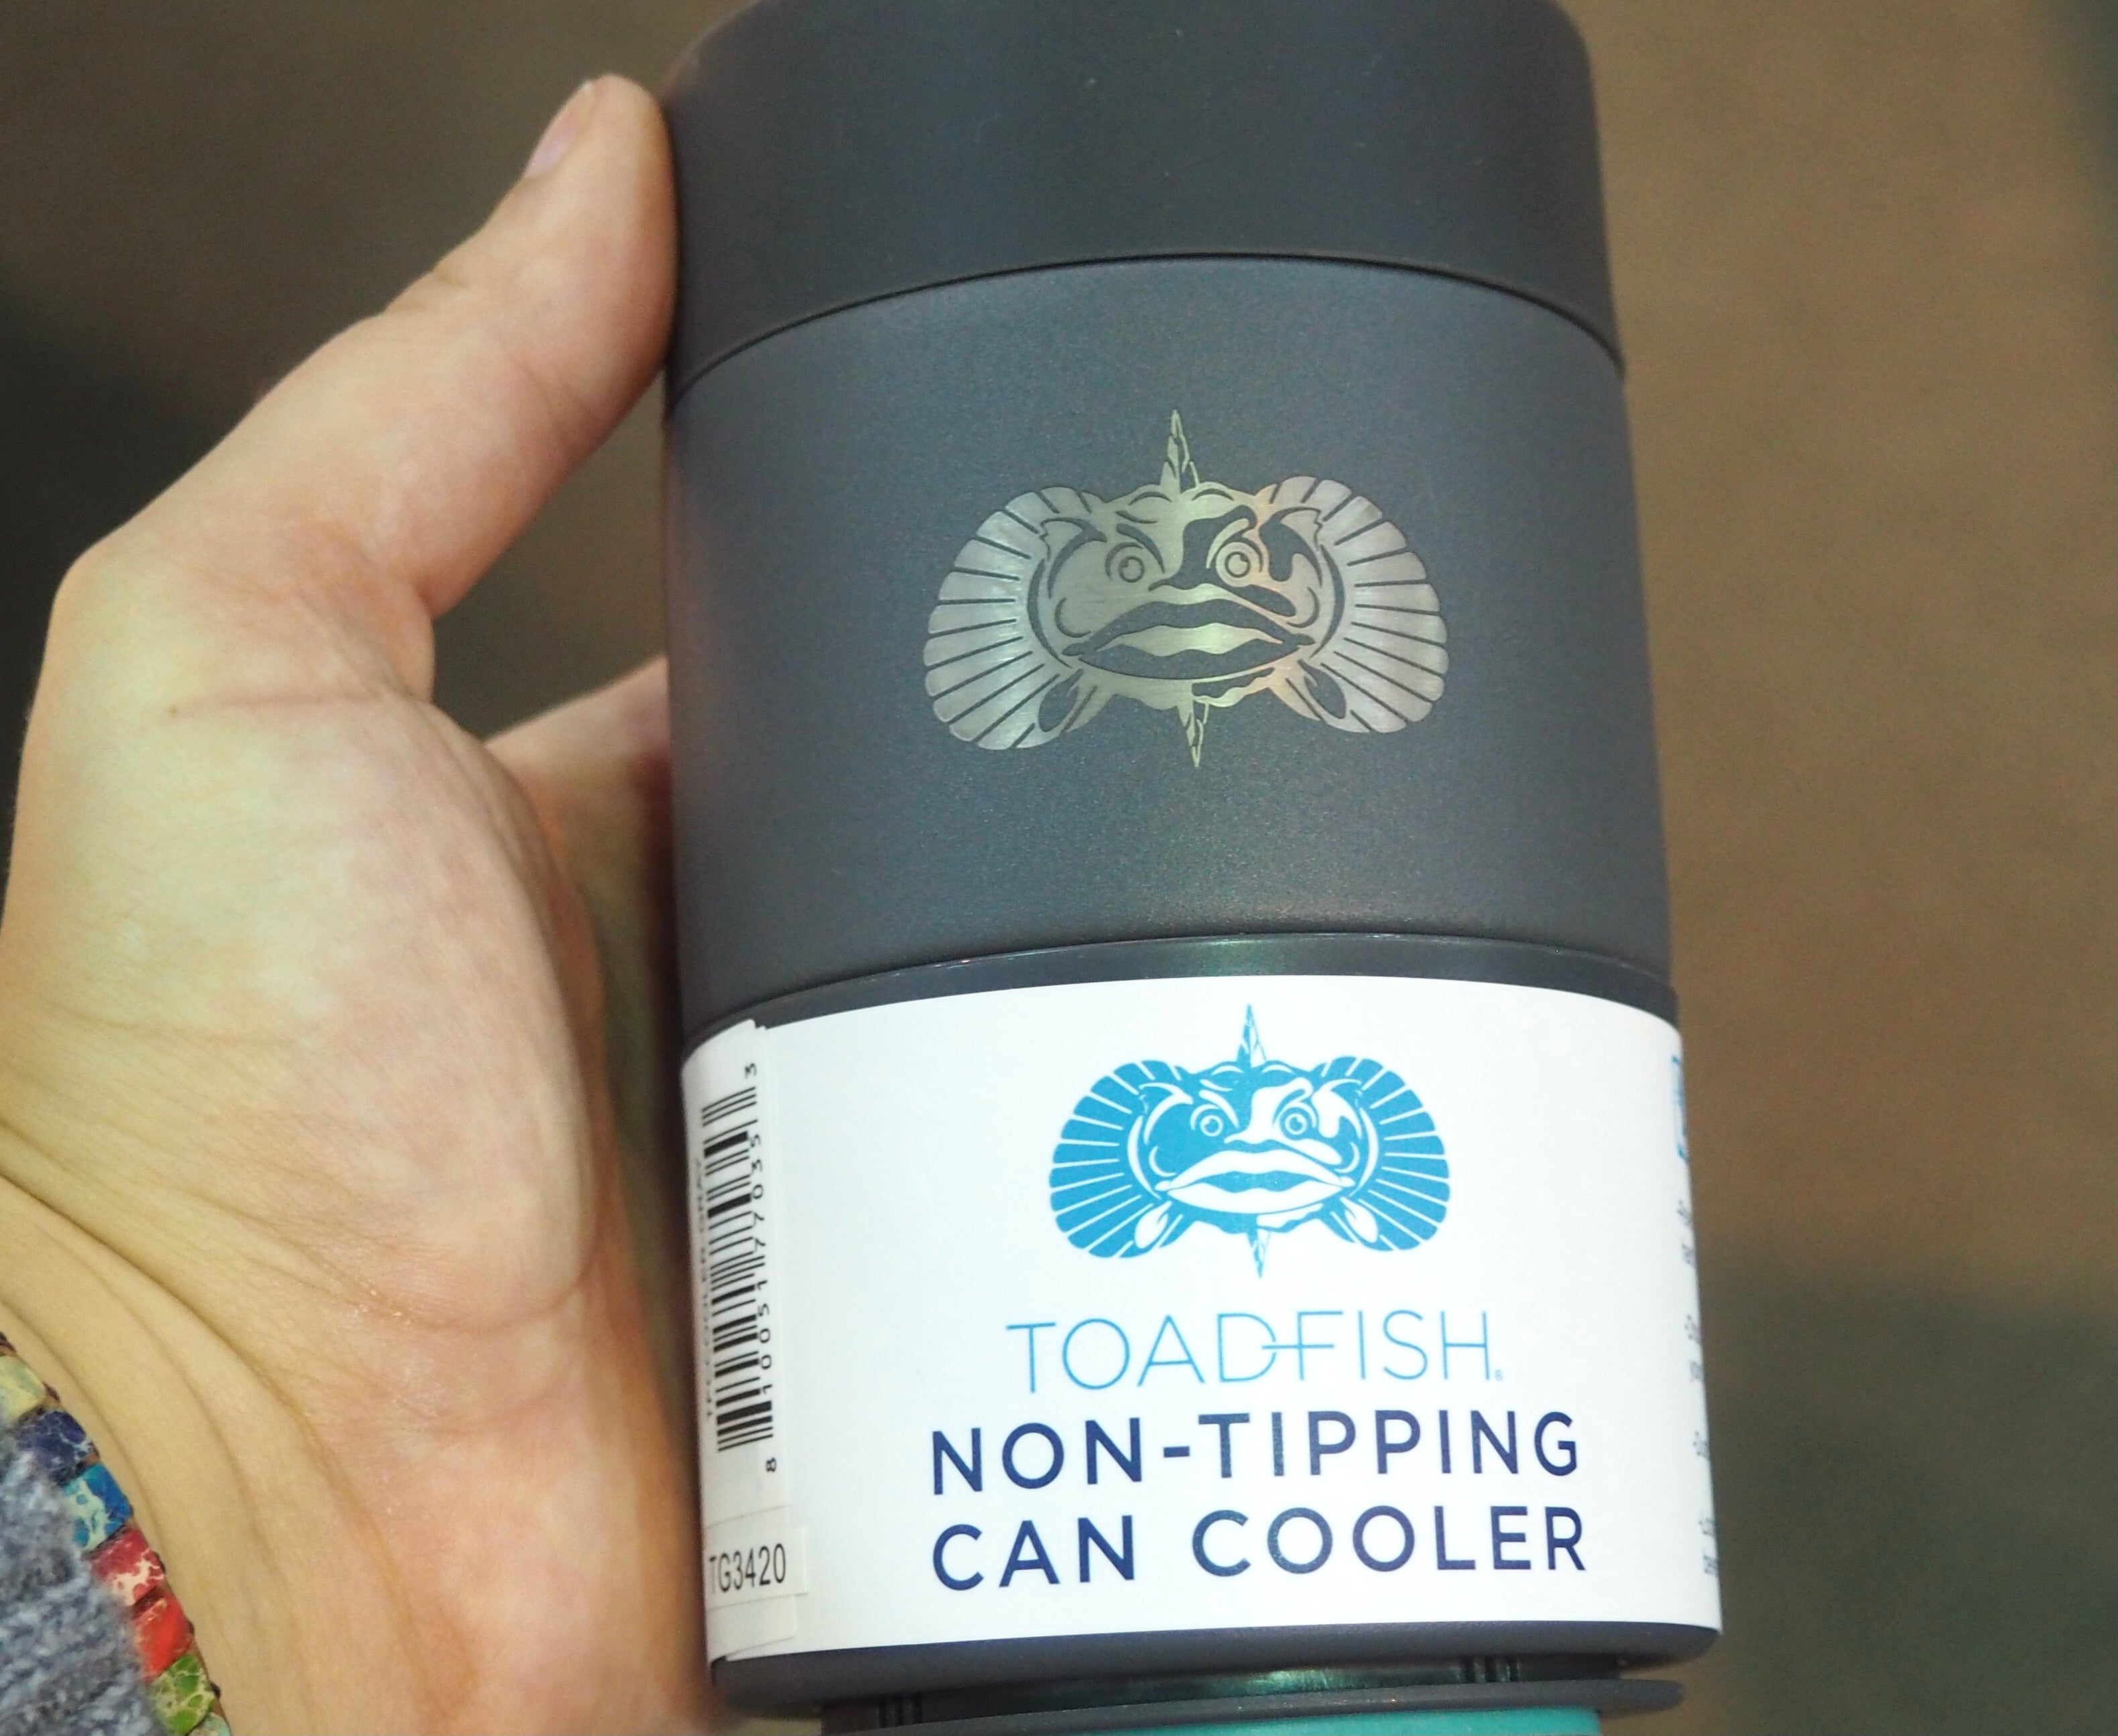 Toadfish Non-Tipping Cup Holder